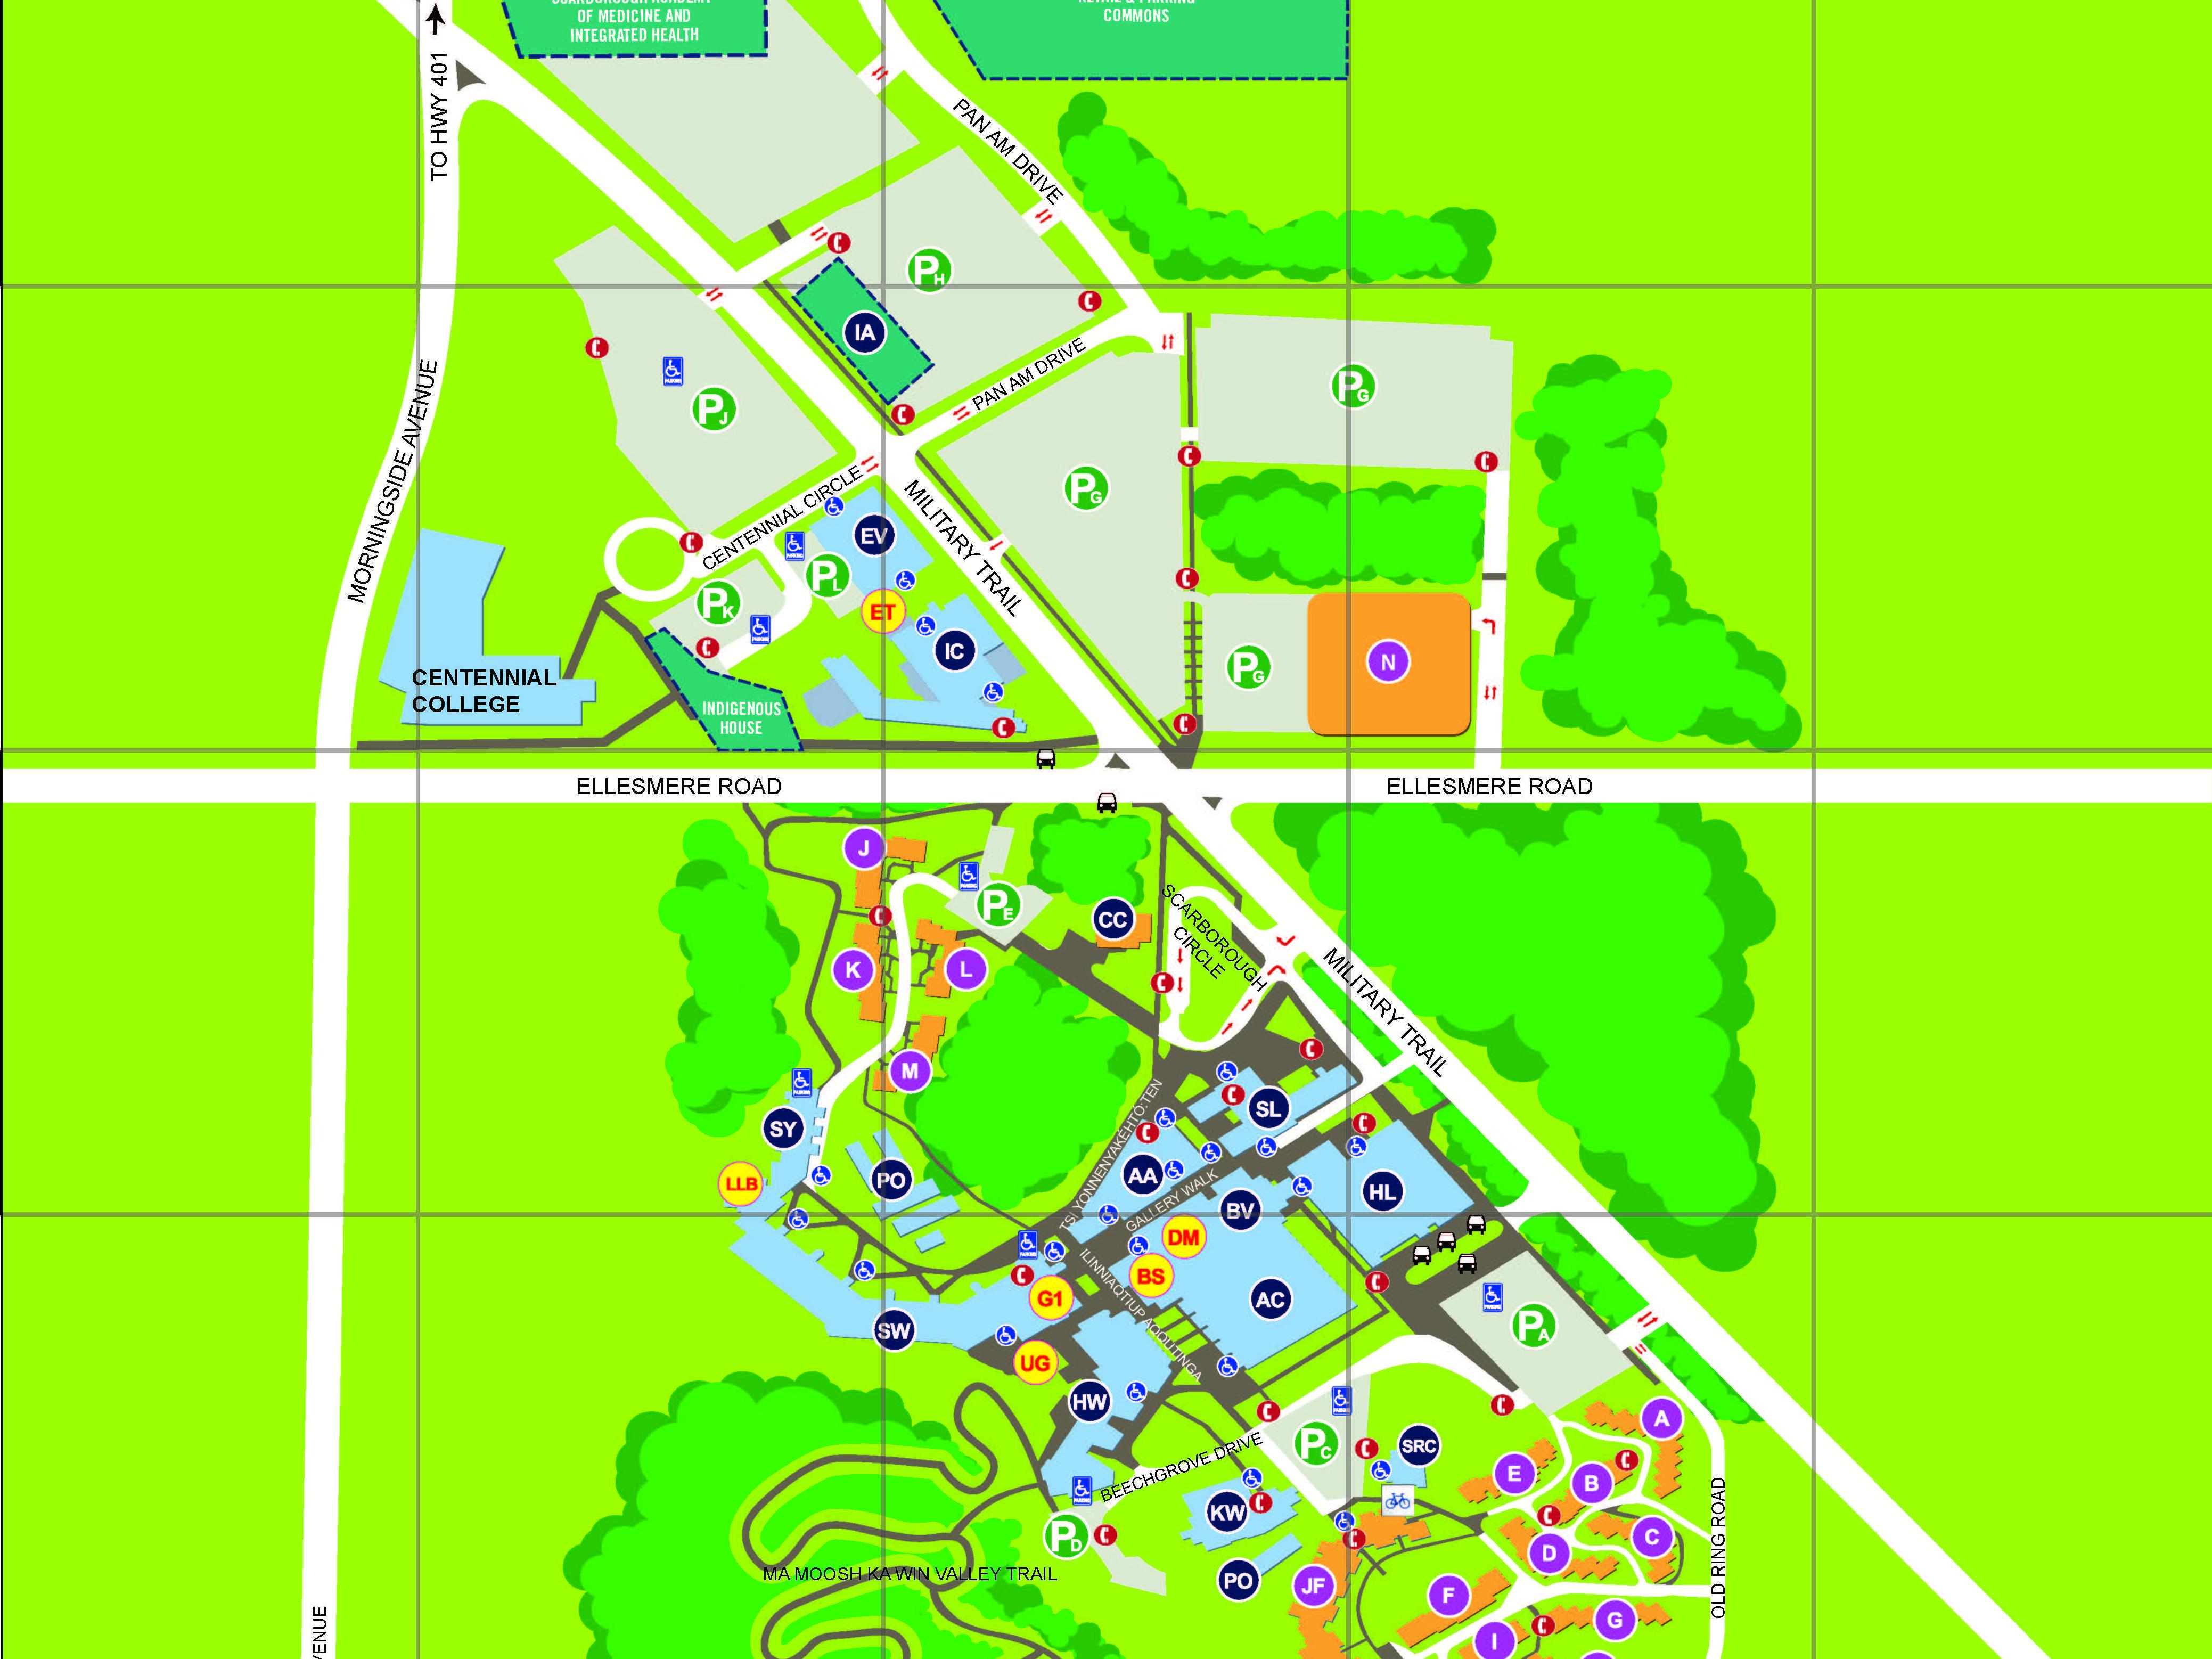 A section of the University of Toronto Scarborough campus map